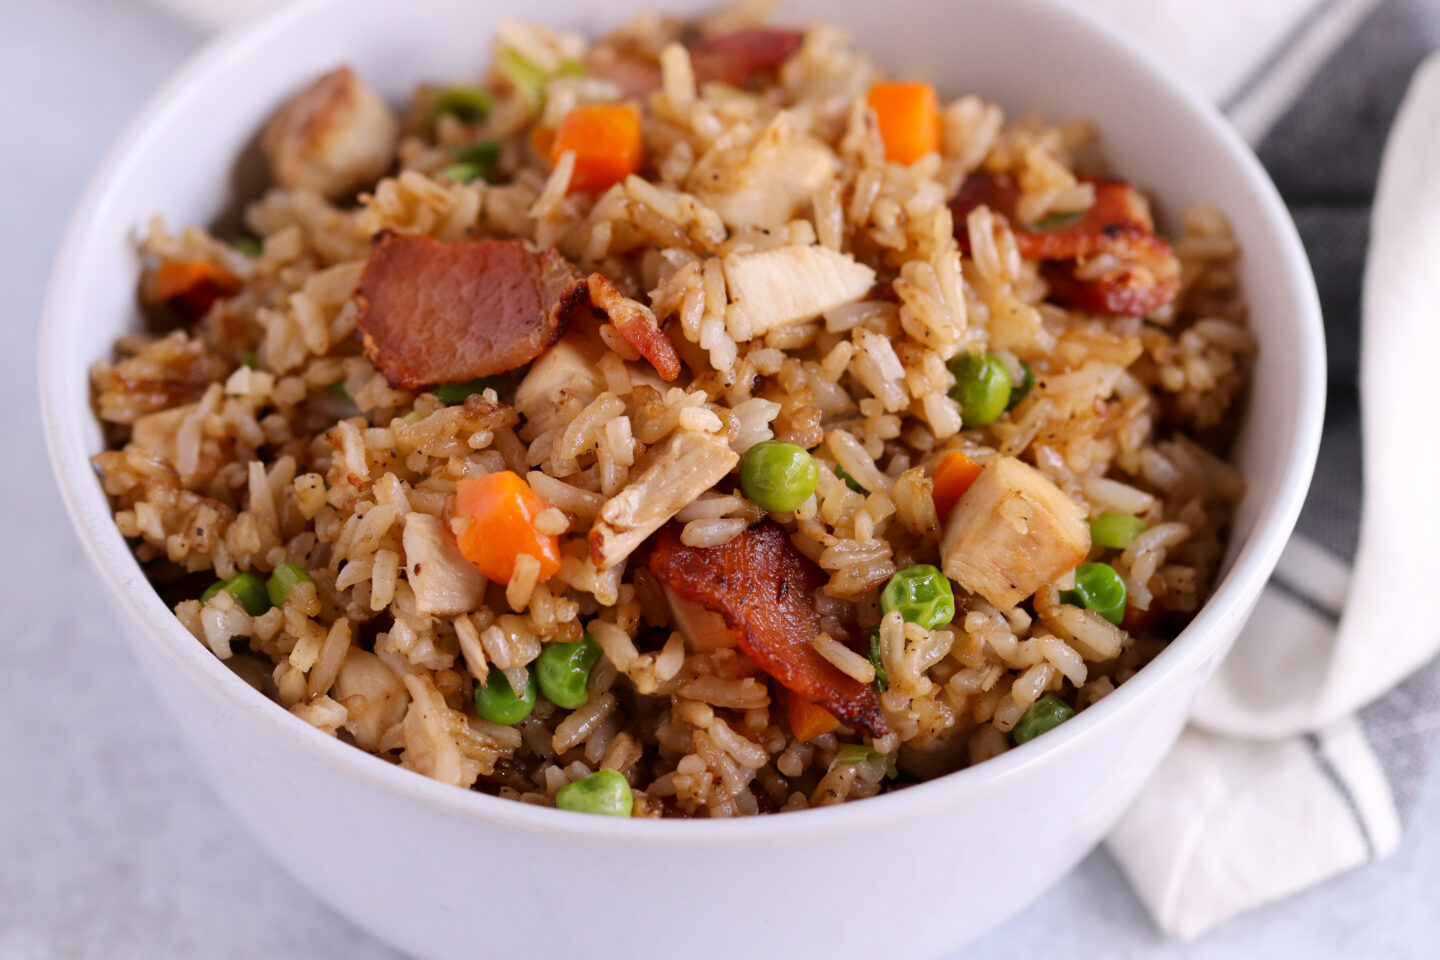 BACON AND CHICKEN FRIED RICE